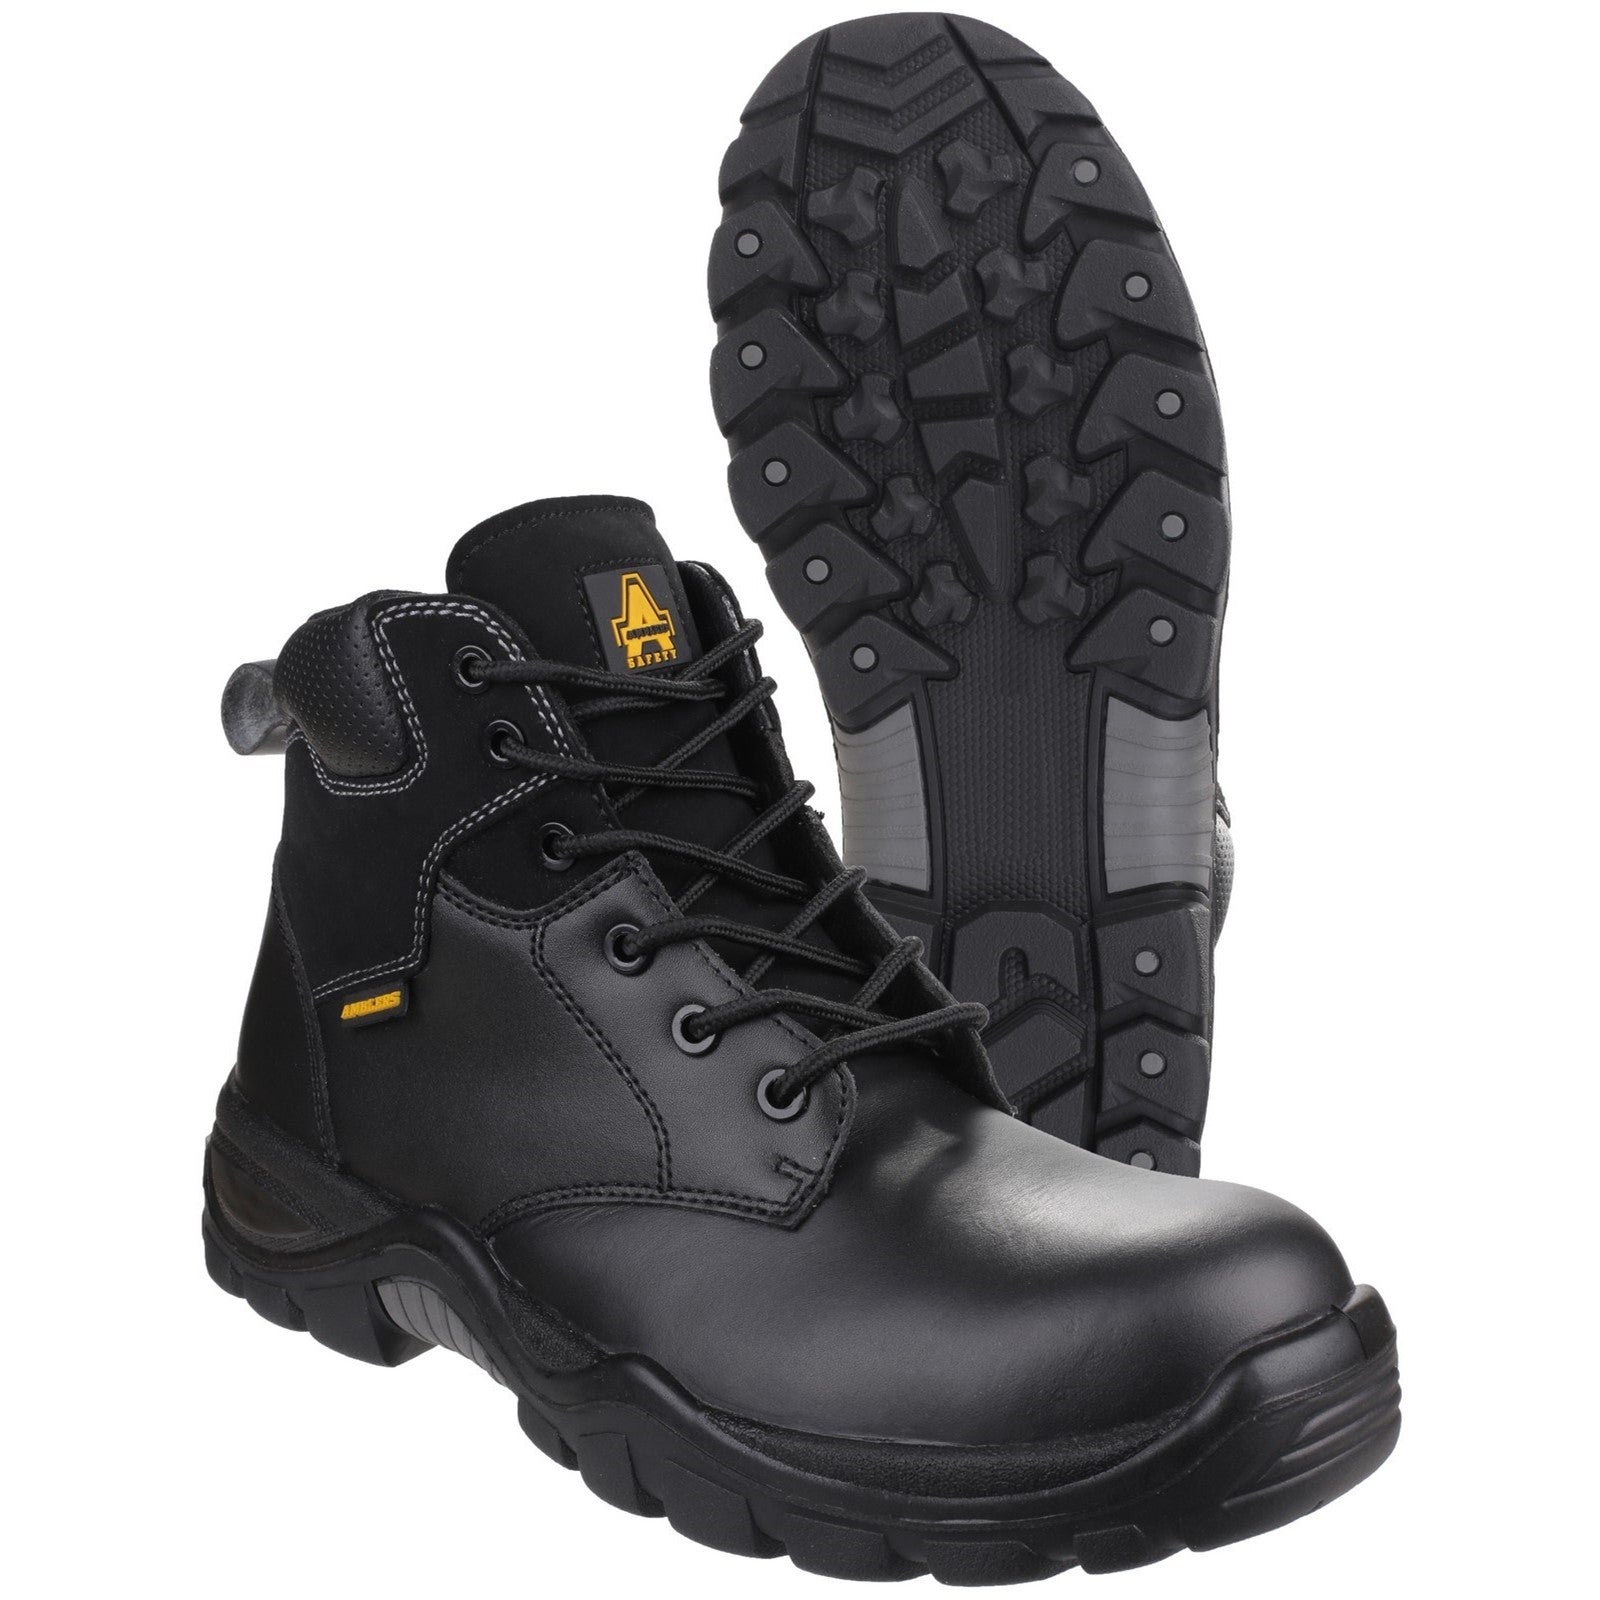 Amblers AS302C Preseli Non-Metal Lace up Safety Boot